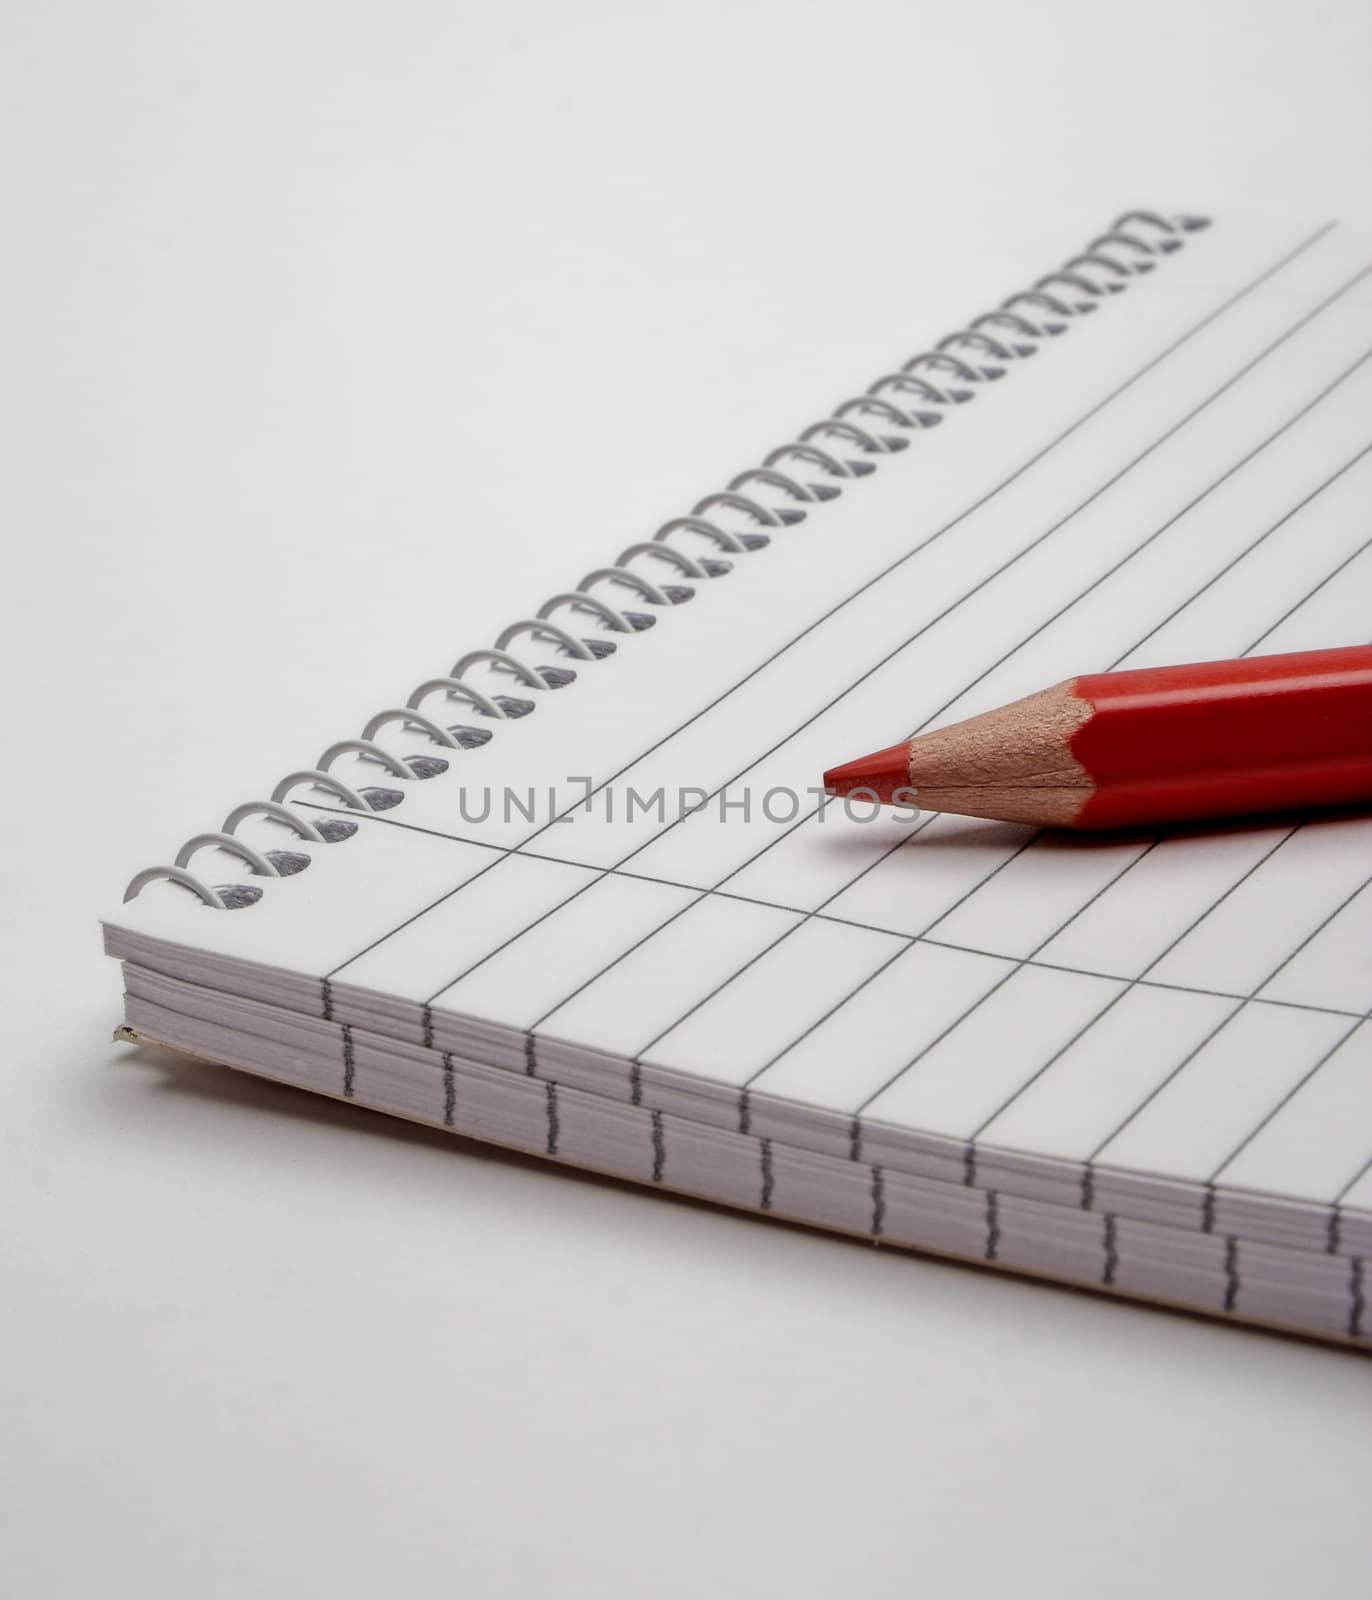 Notebook and pencil by alexkosev